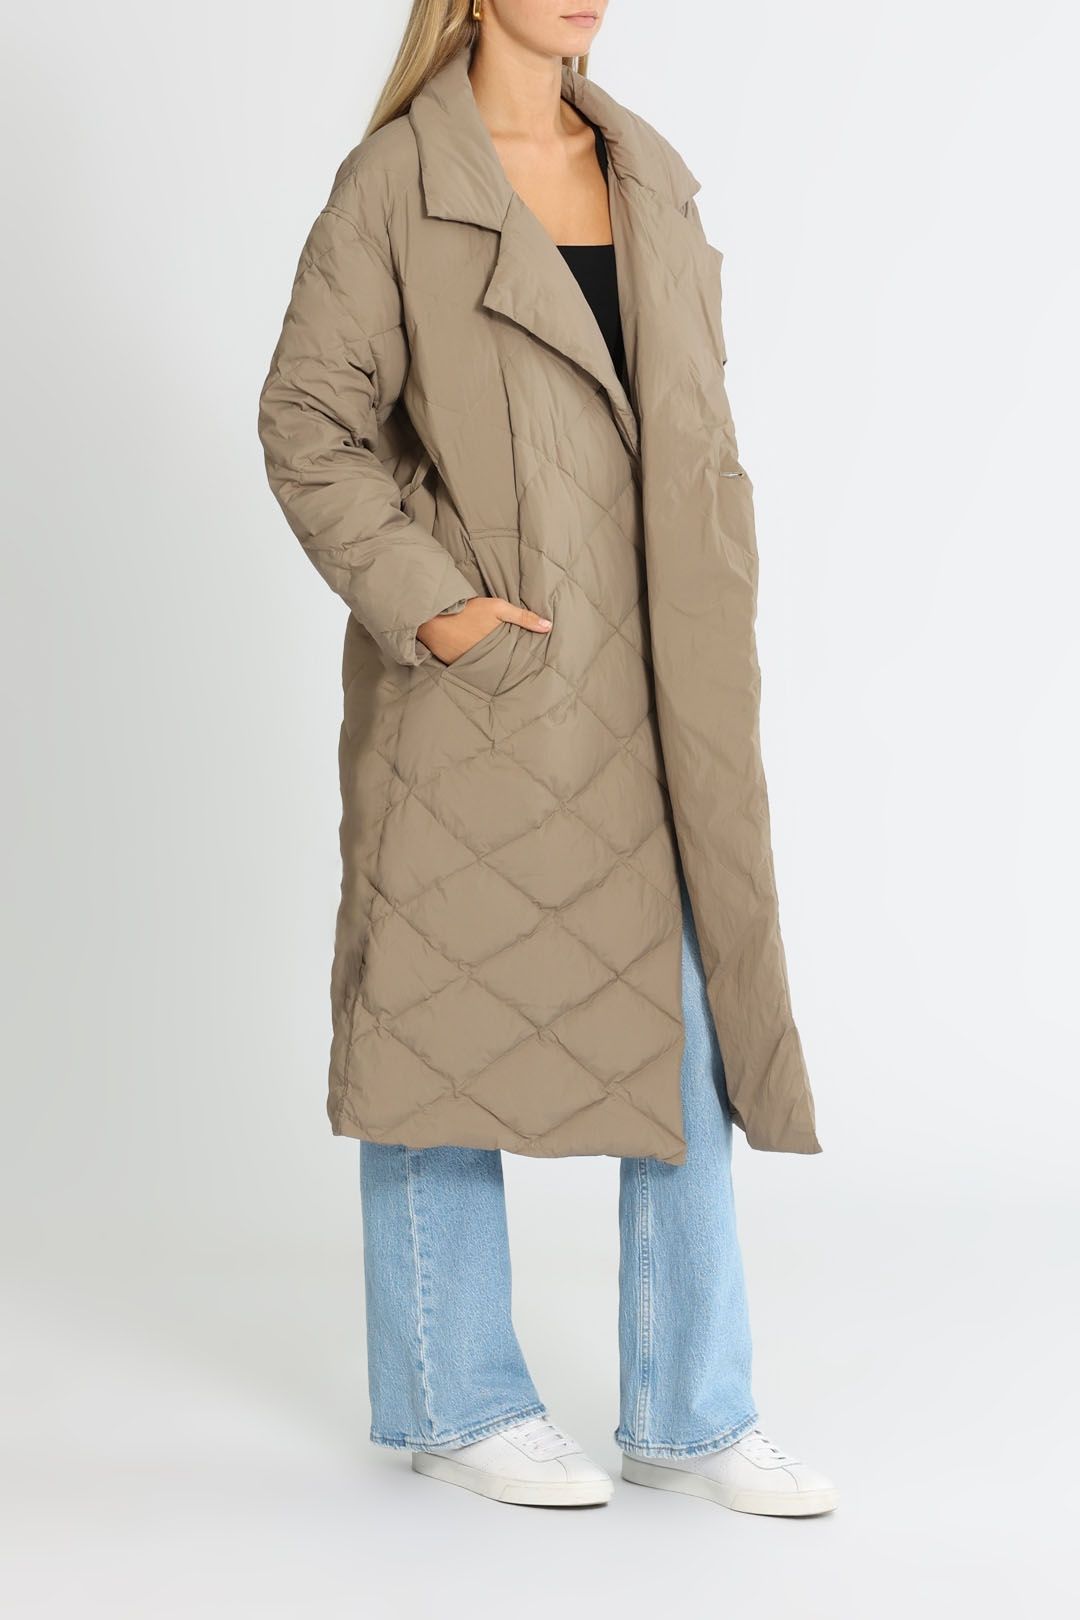 Elka Collective Simone Down Coat Taupe Long Sleeves